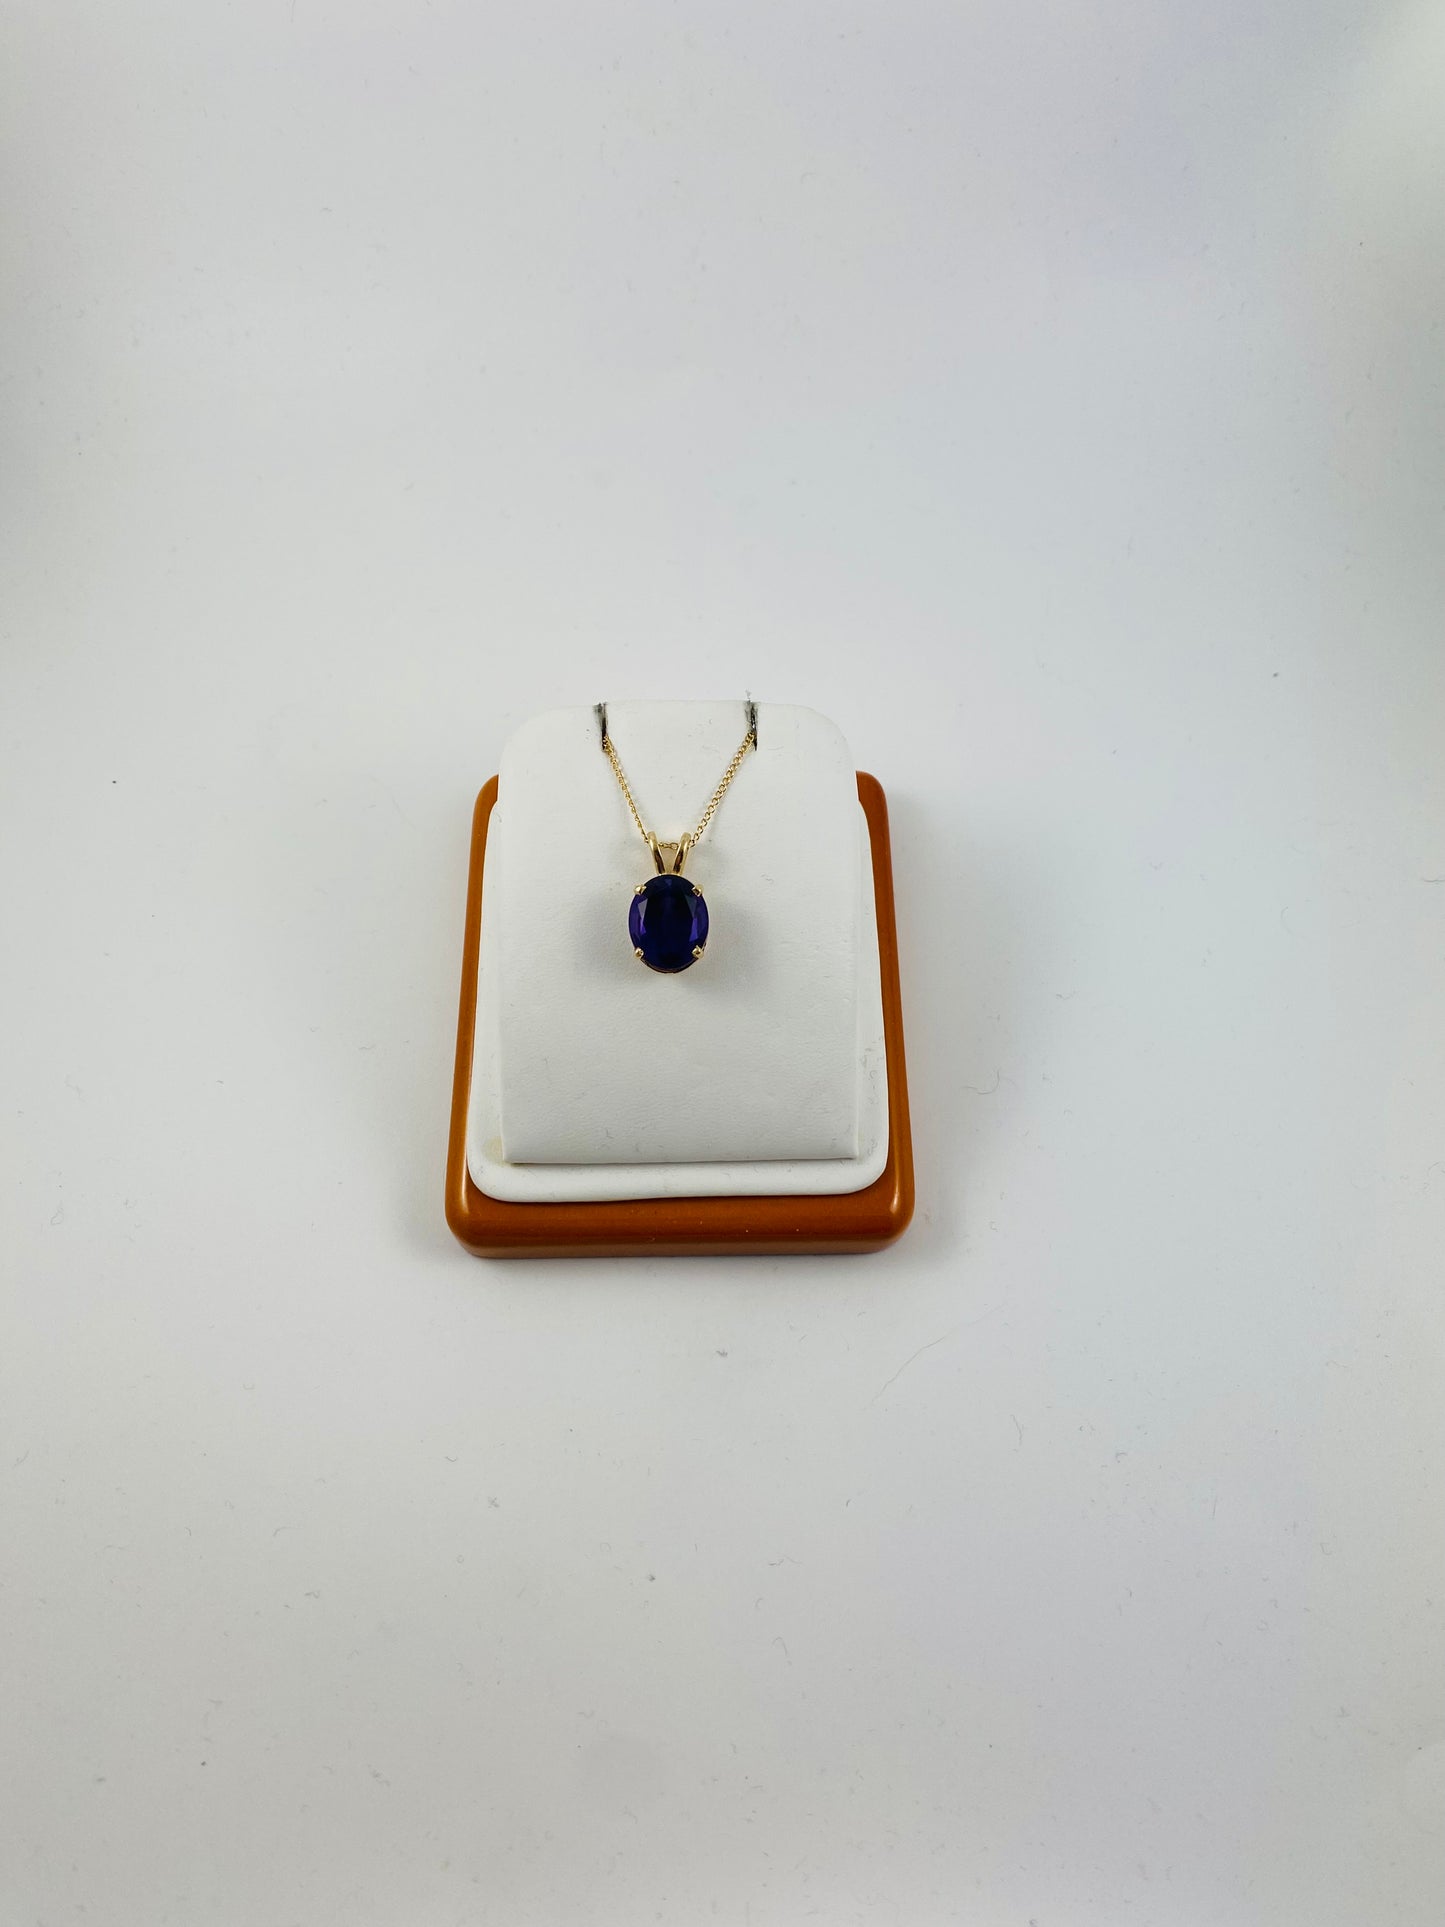 Amethyst Necklace in 14k Yellow Gold 18”